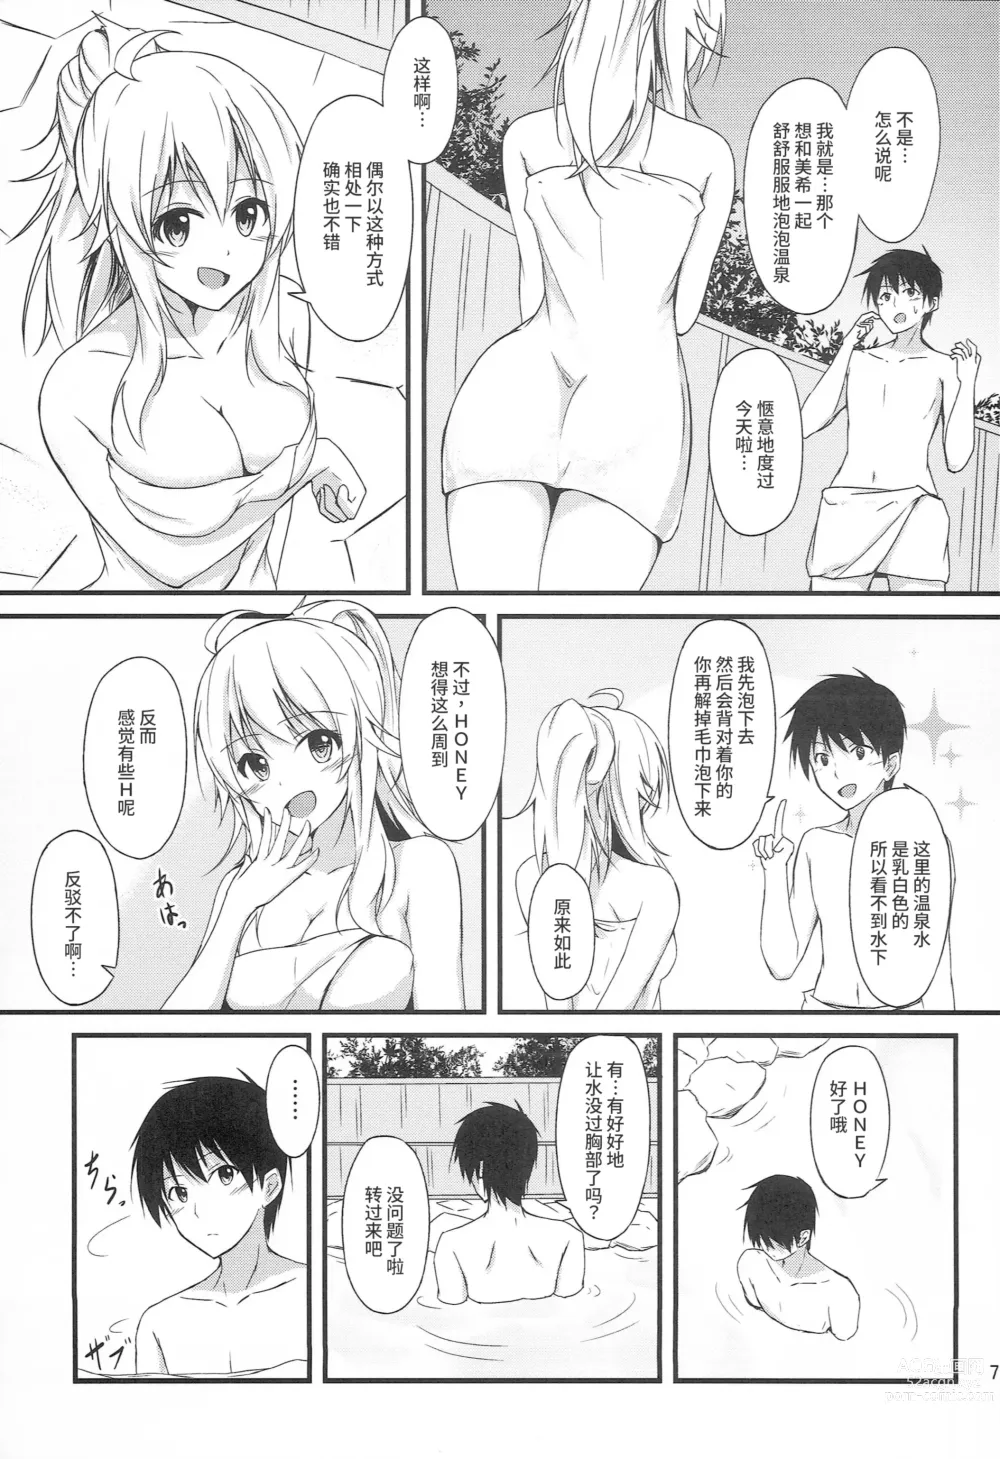 Page 5 of doujinshi Miki to Honey no DeepLove